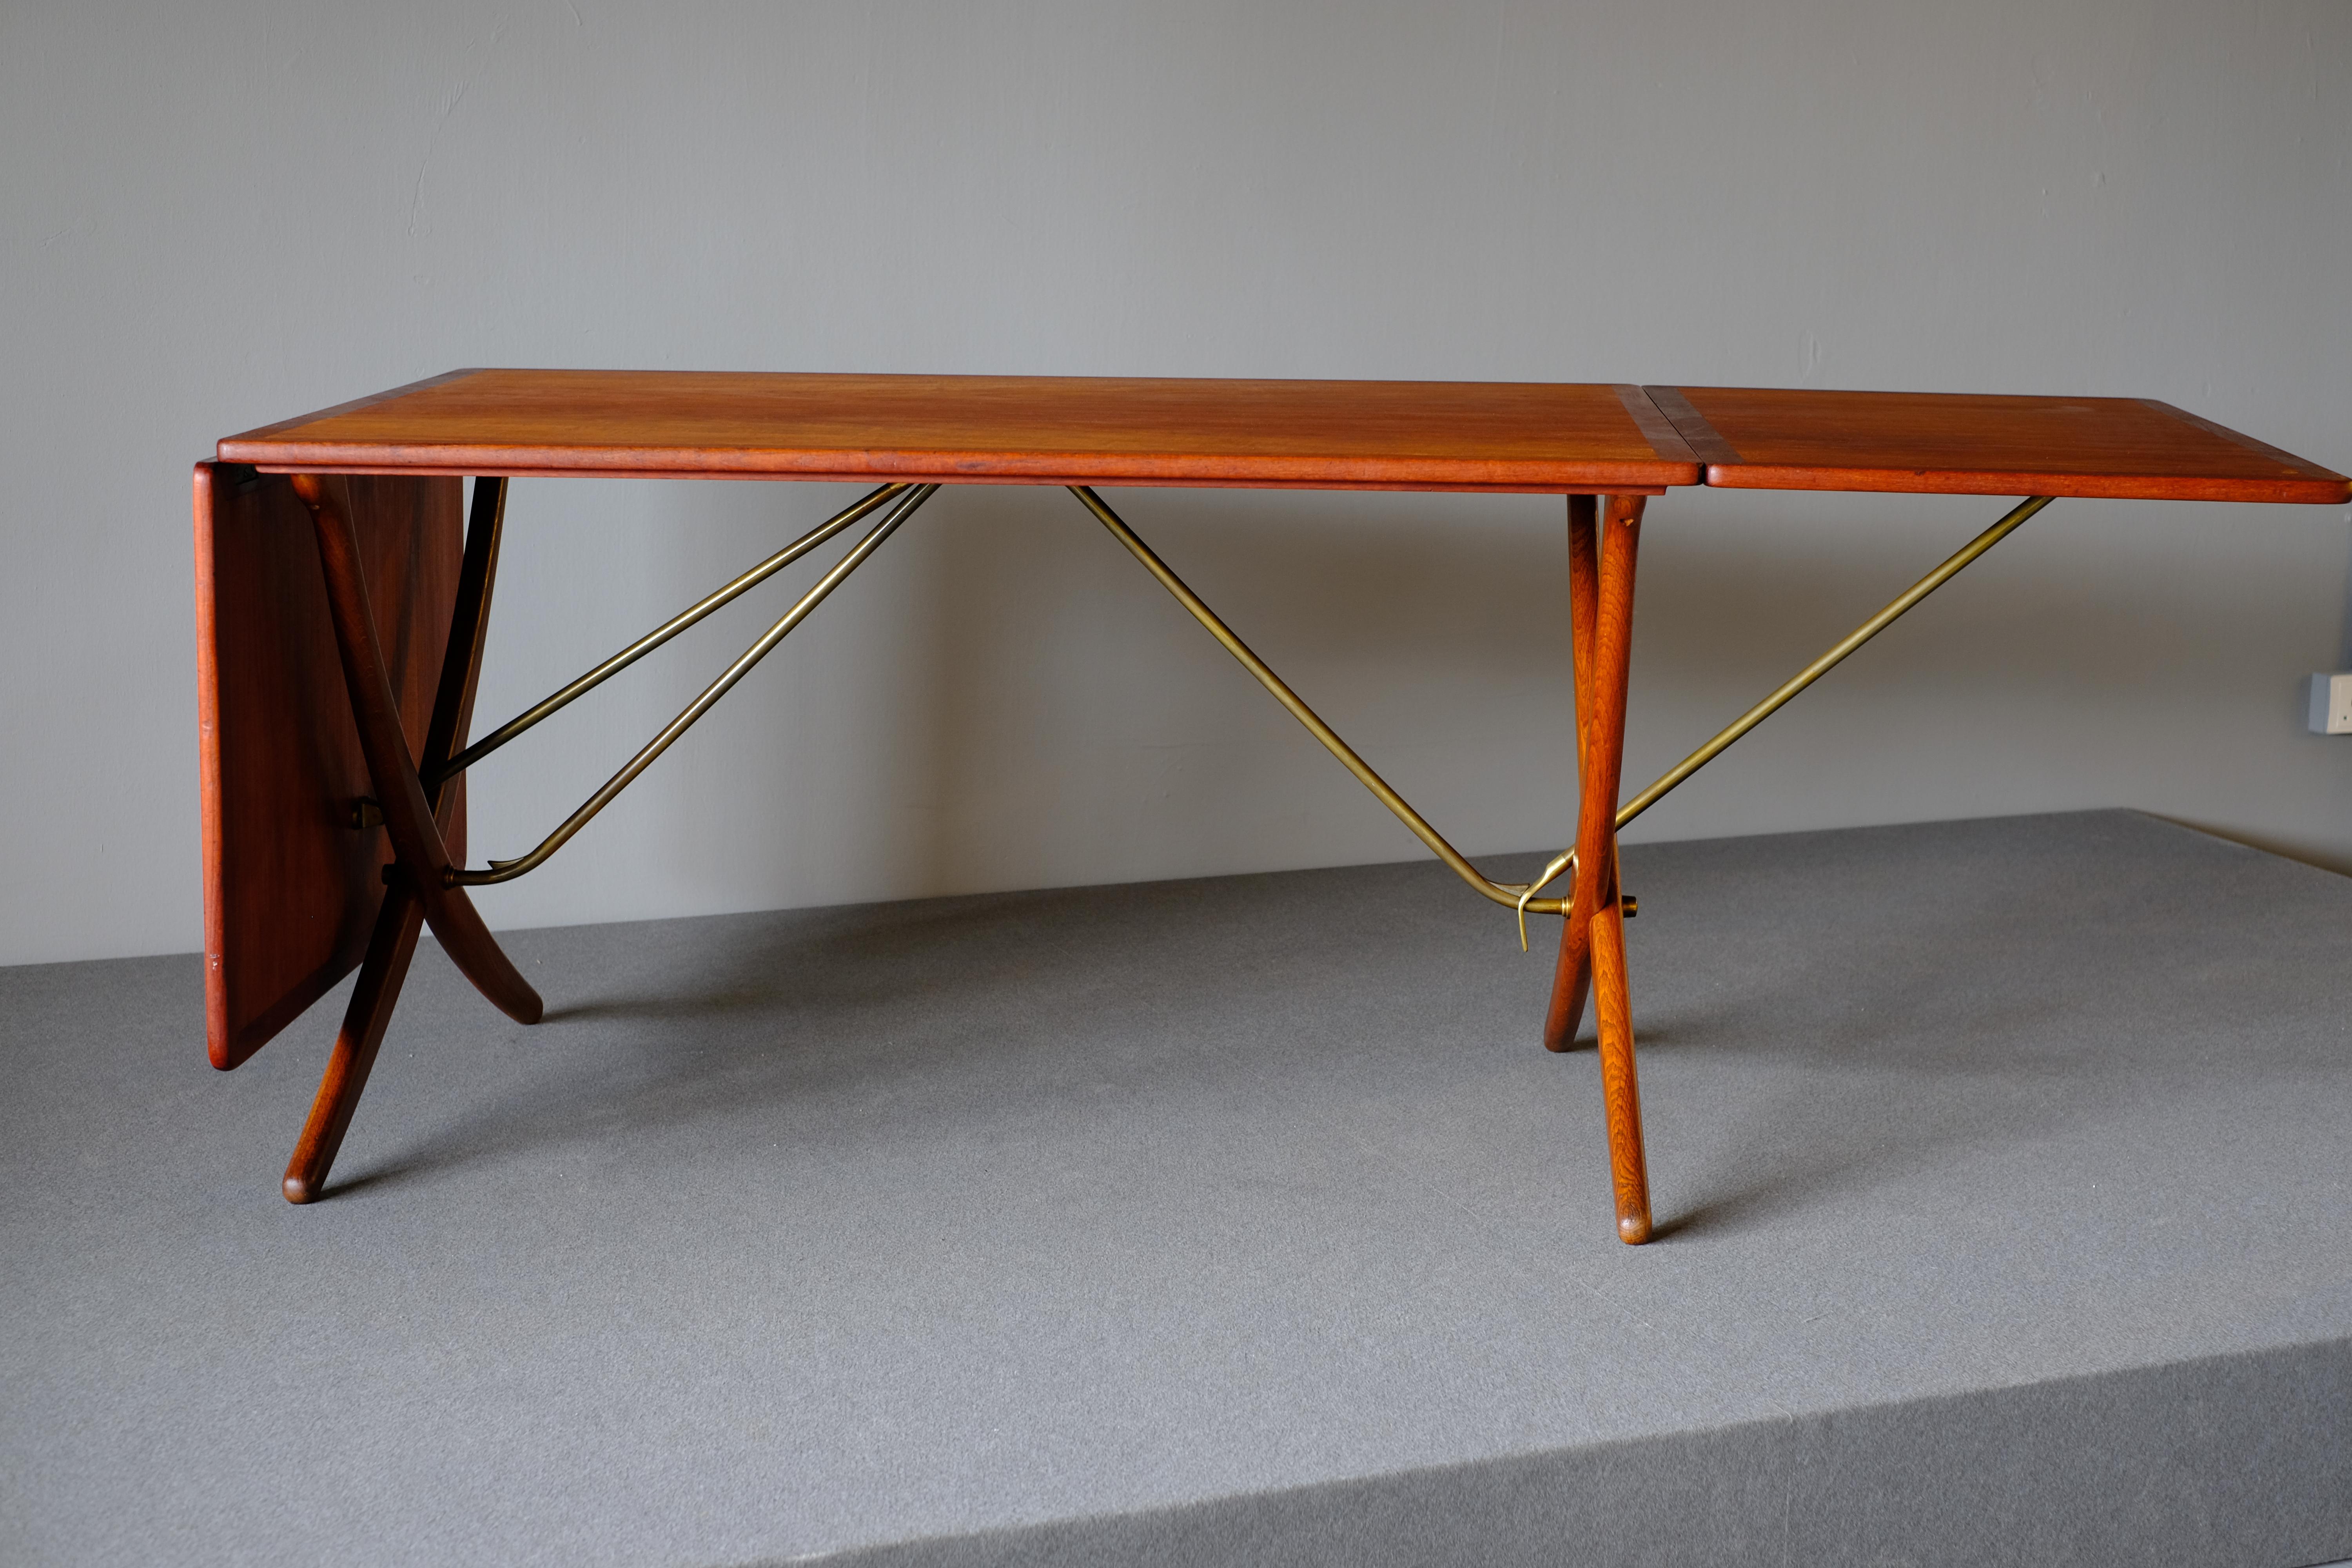 This is a rare teak and oak drop-leaf table. The iconic dining table AT-304 was designed by Hans Wegner and produced by Andreas Tuck. The table is made of teak with two leaves with distinctive the sabre-formed crossed legs in oak which are supported